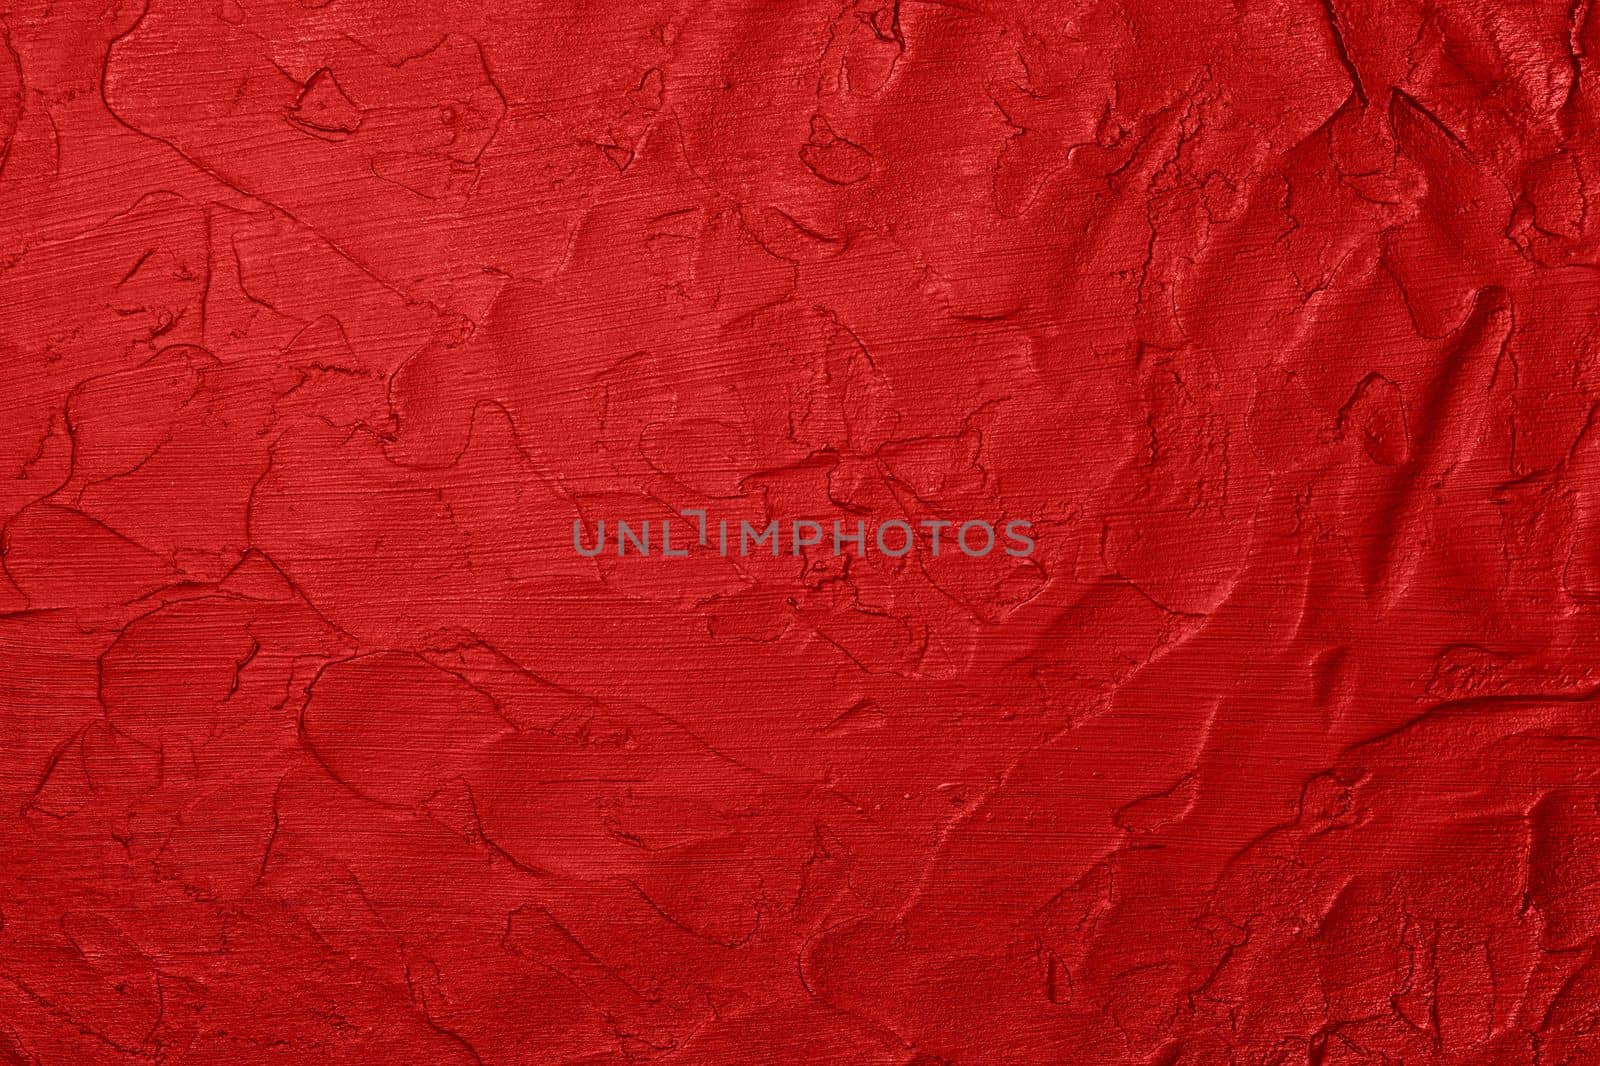 Red uneven grunge surface abstract background by BreakingTheWalls